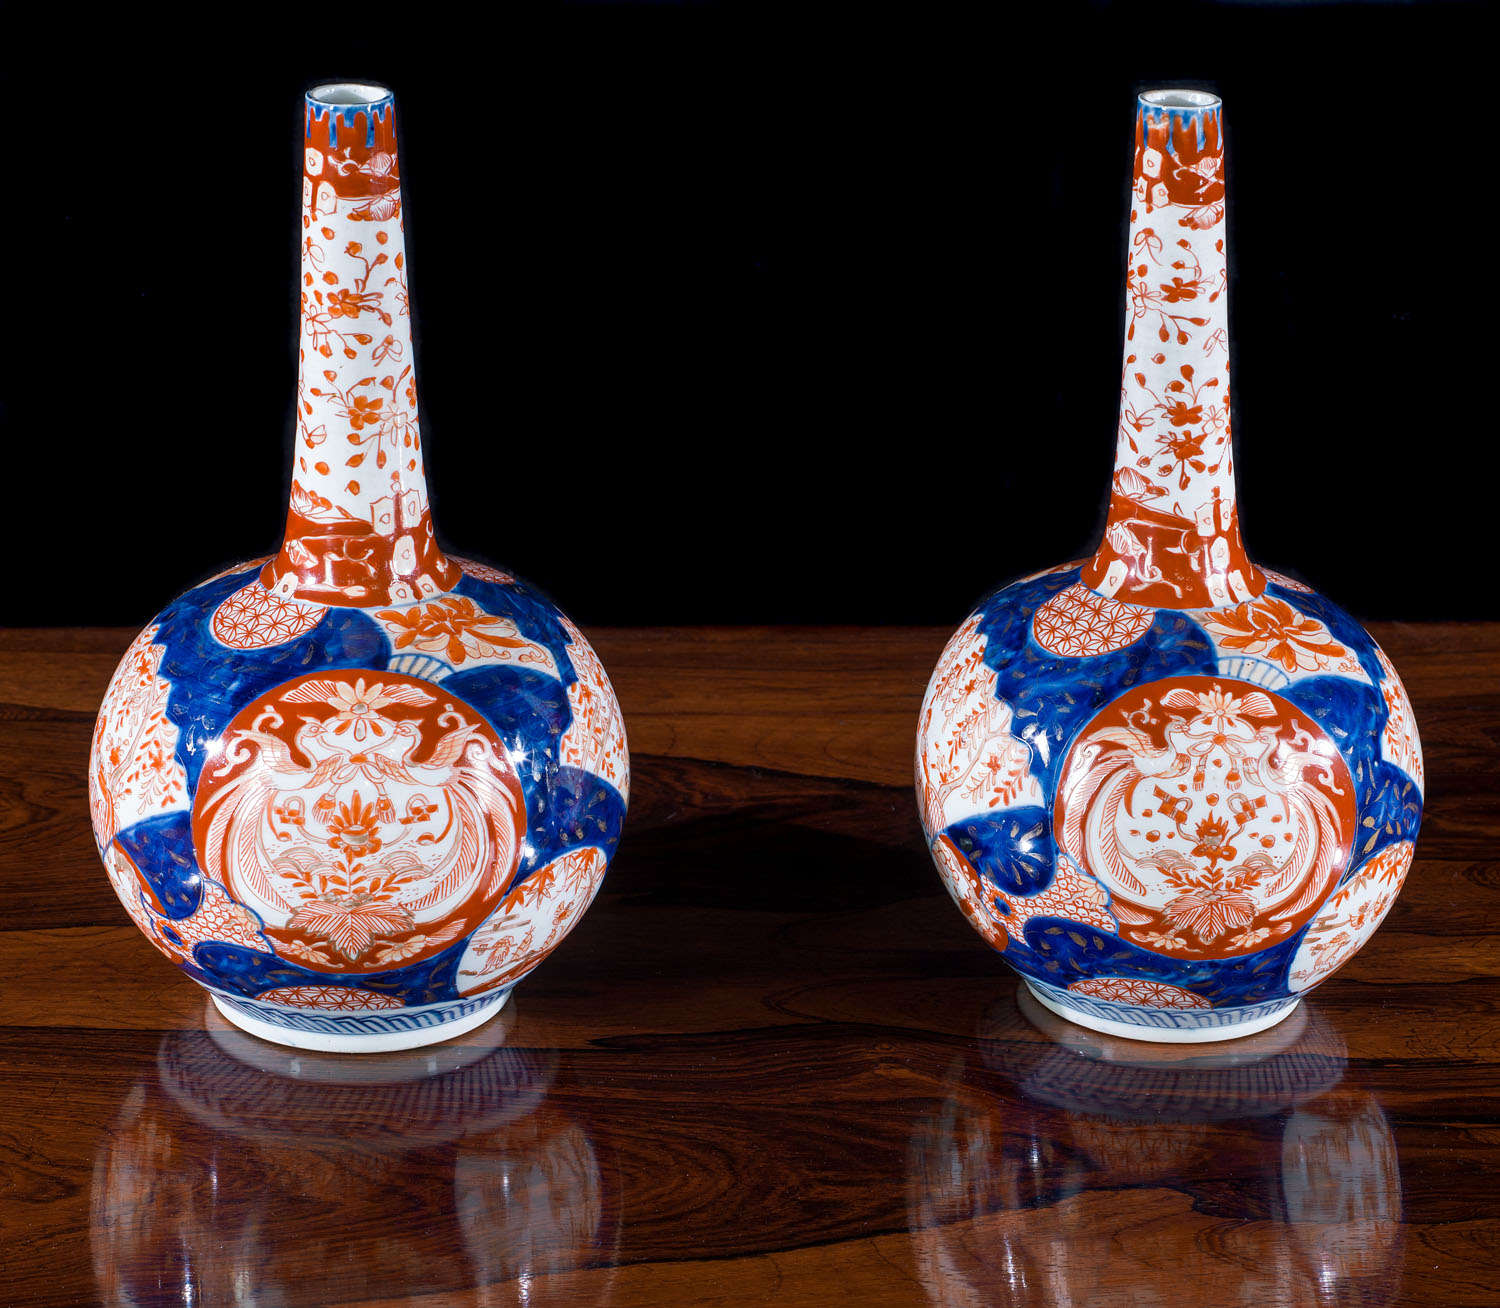 In this blog we explain how to identify antique vases